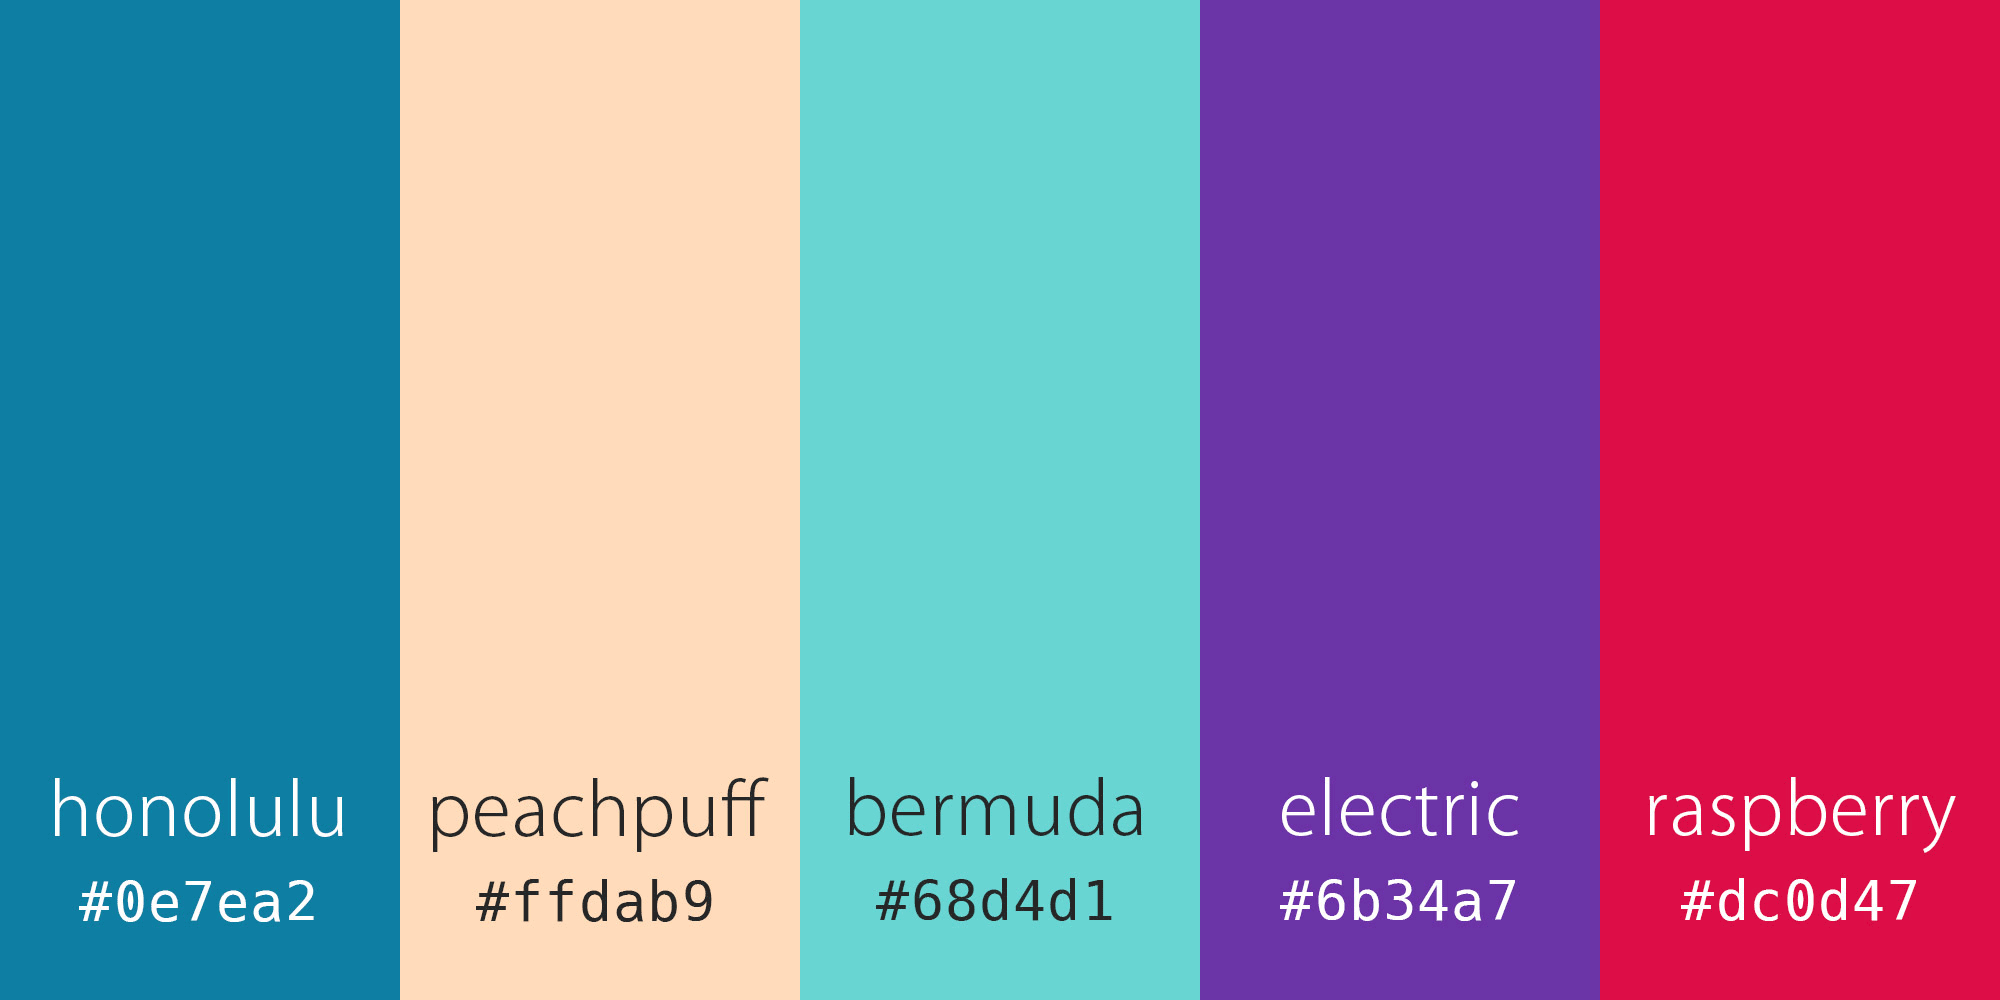 A colour palette with vertical panels of blue, peach, aqua, purple and magenta, labelled “honolulu”, “peachpuff”, “bermuda”, “electric” and “raspberry”, with corresponding hex colour codes underneath